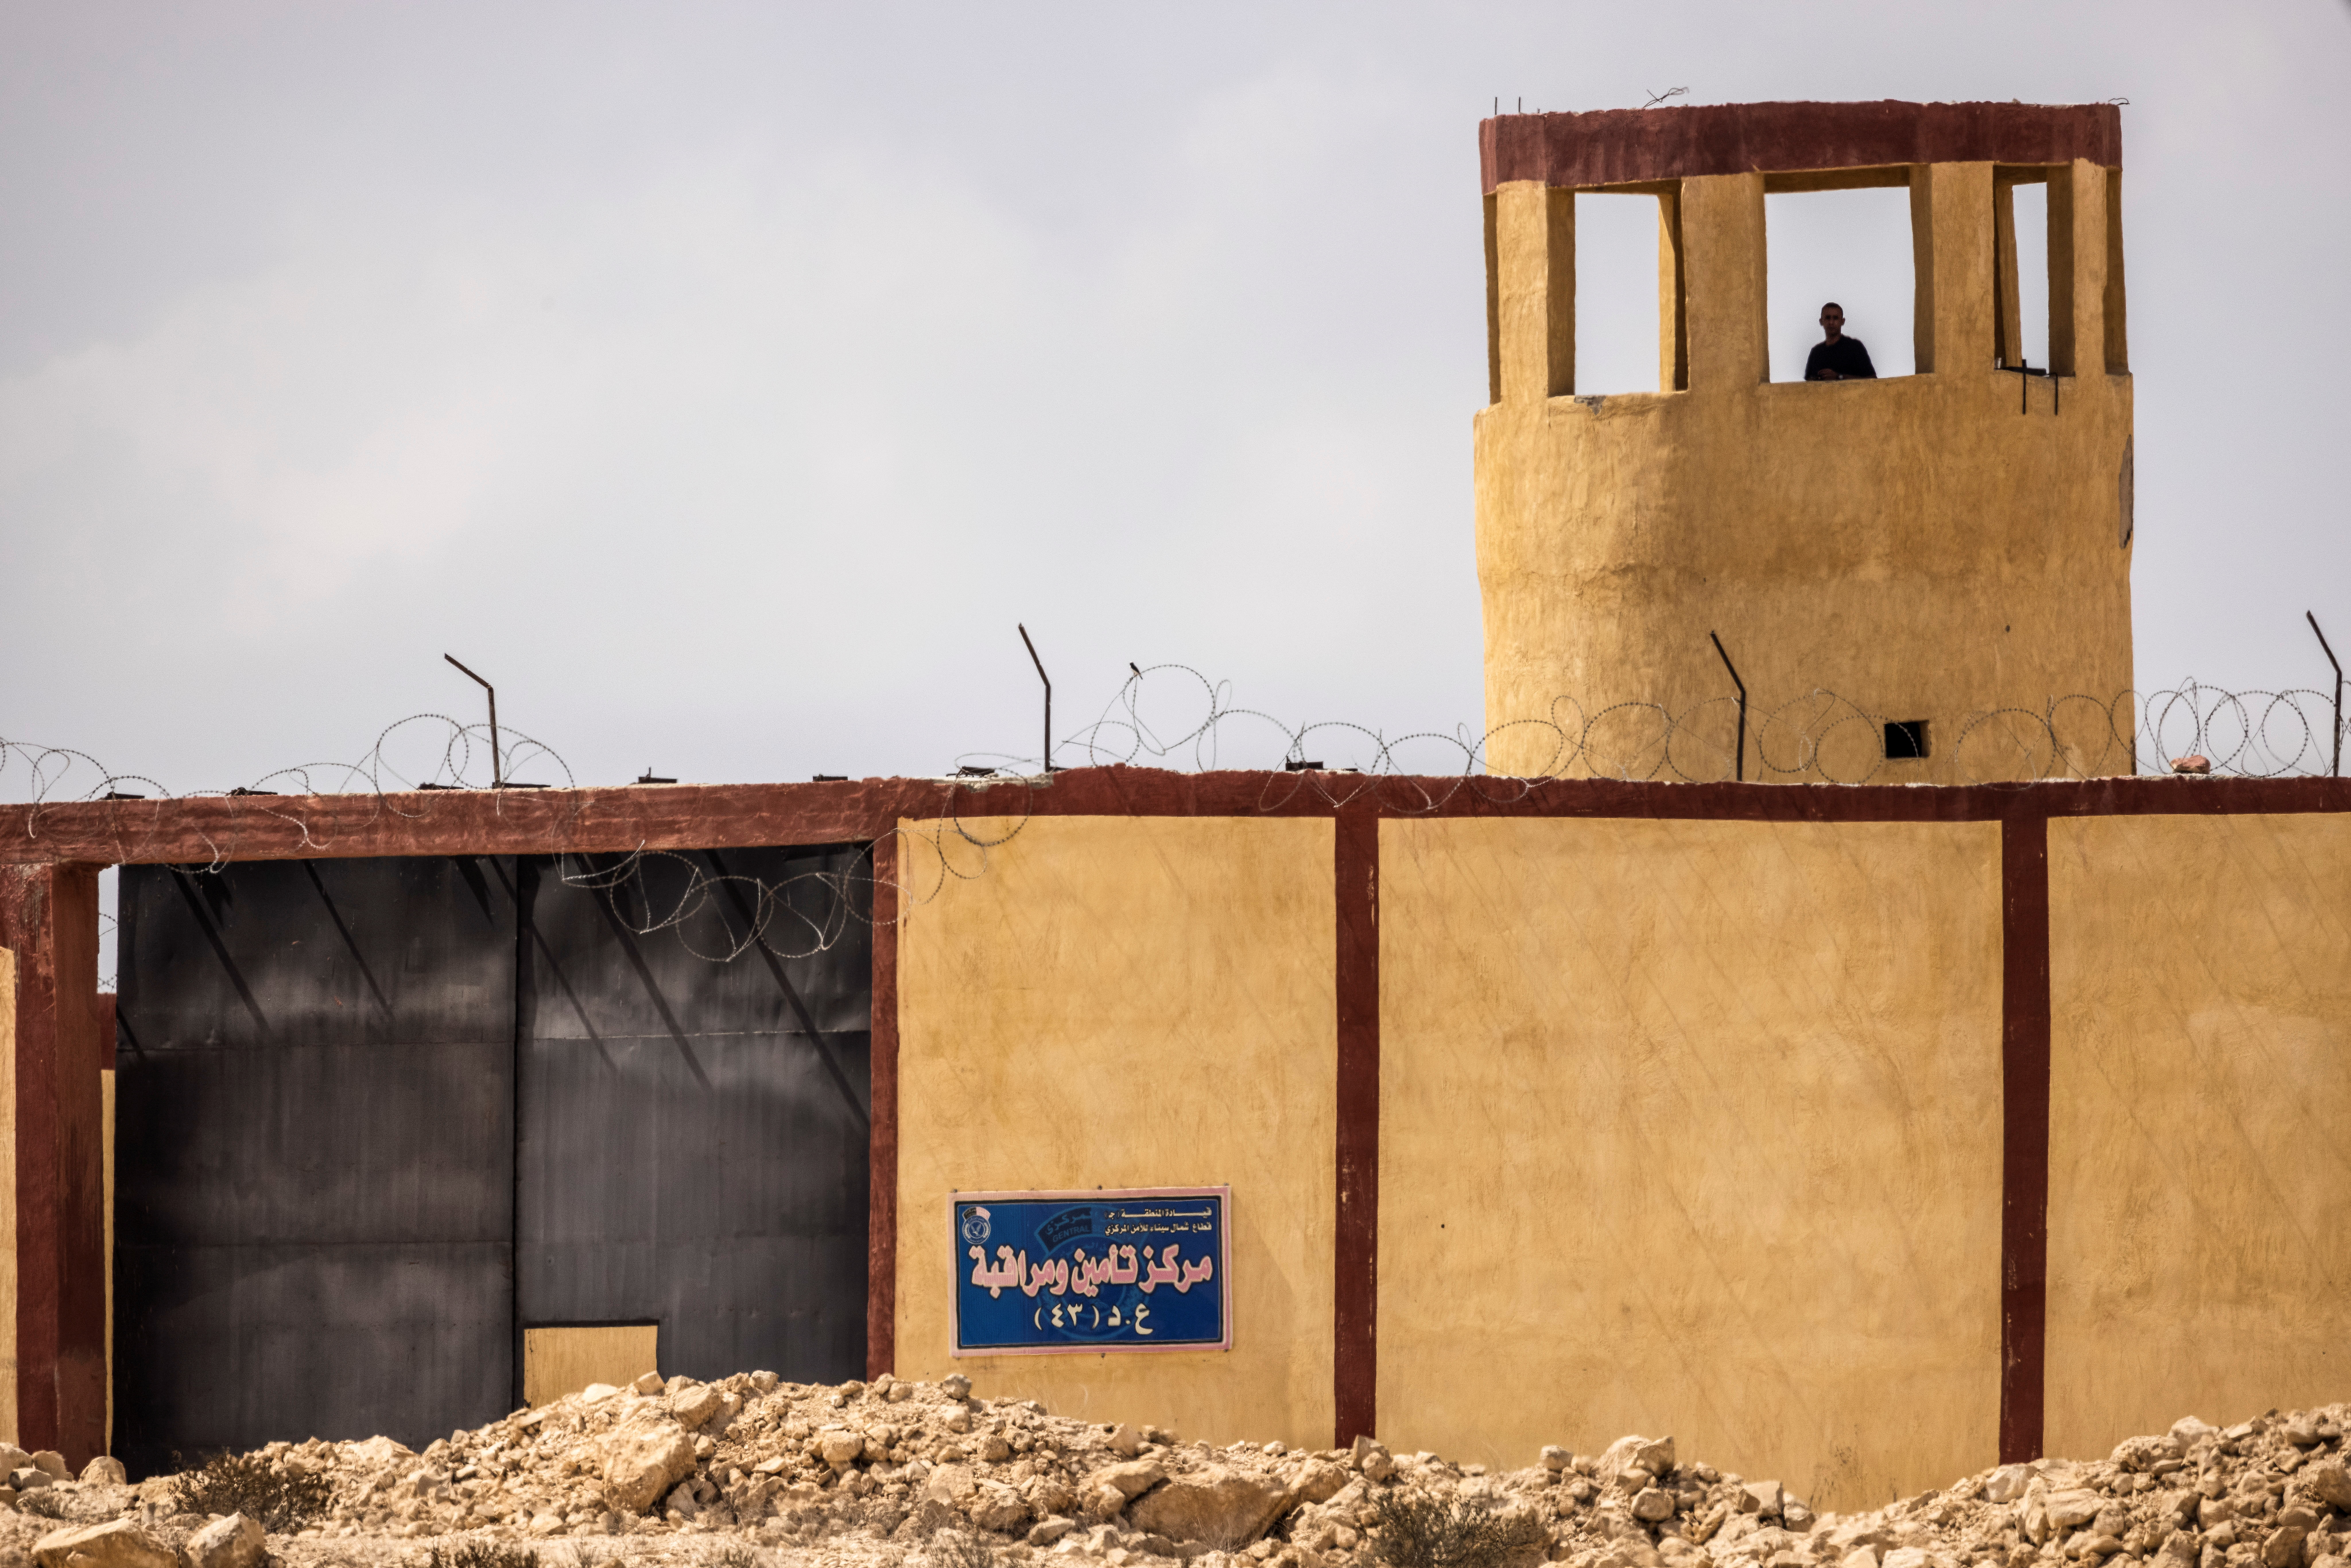 An Egyptian man stands guard in a military outpost overlooking the Israeli-Egyptian border as seen from southern Israel